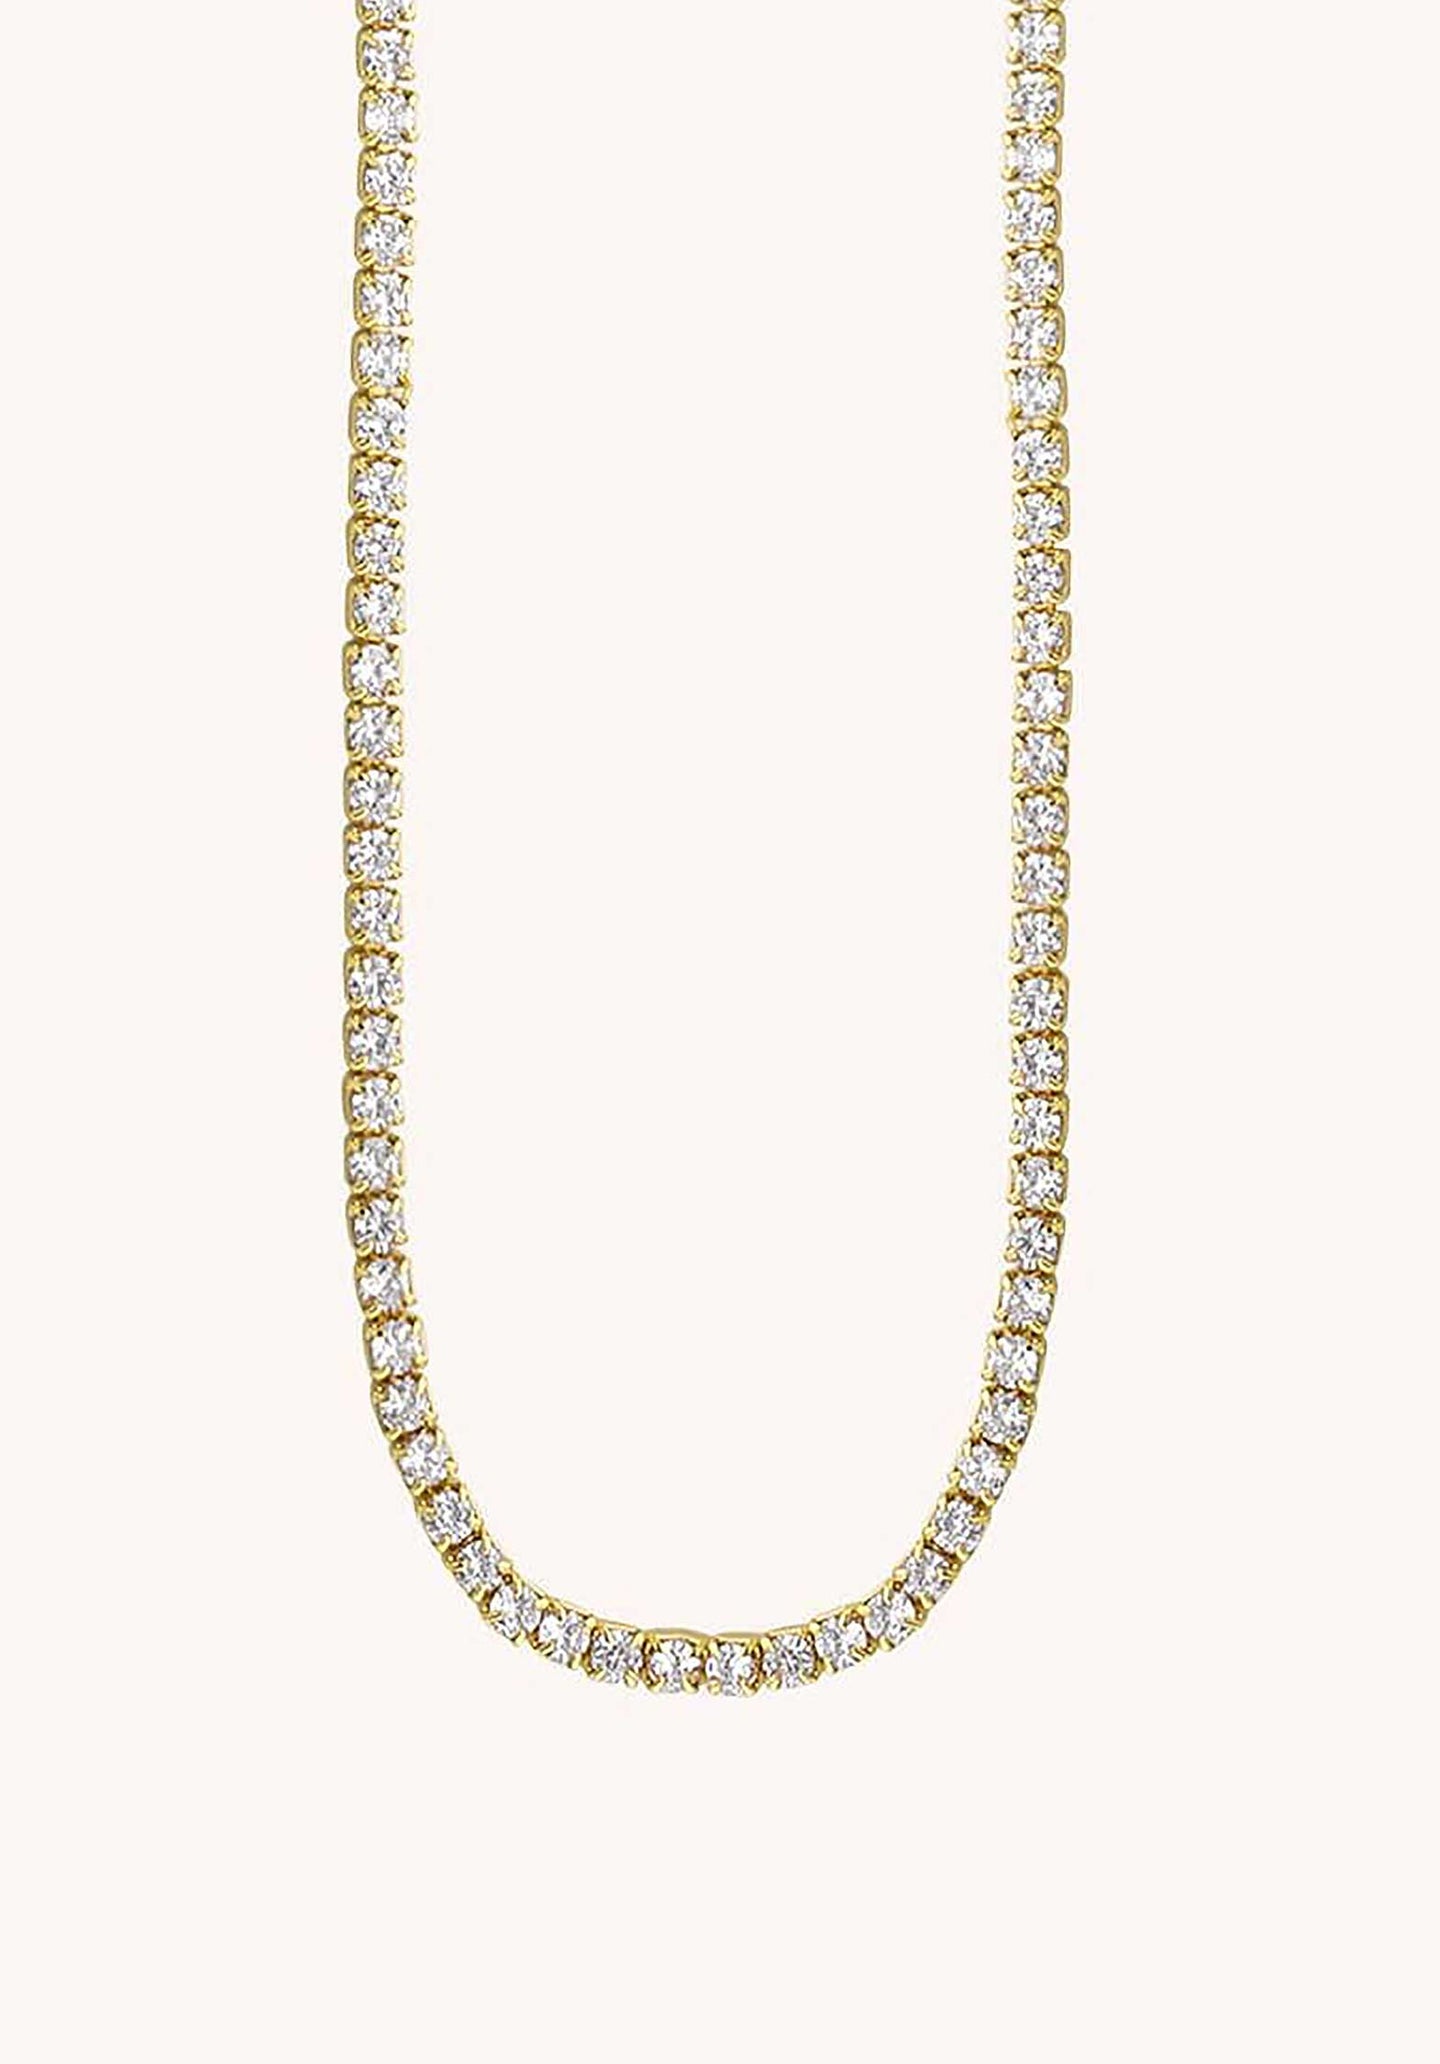 Necklace Co-196g Gold